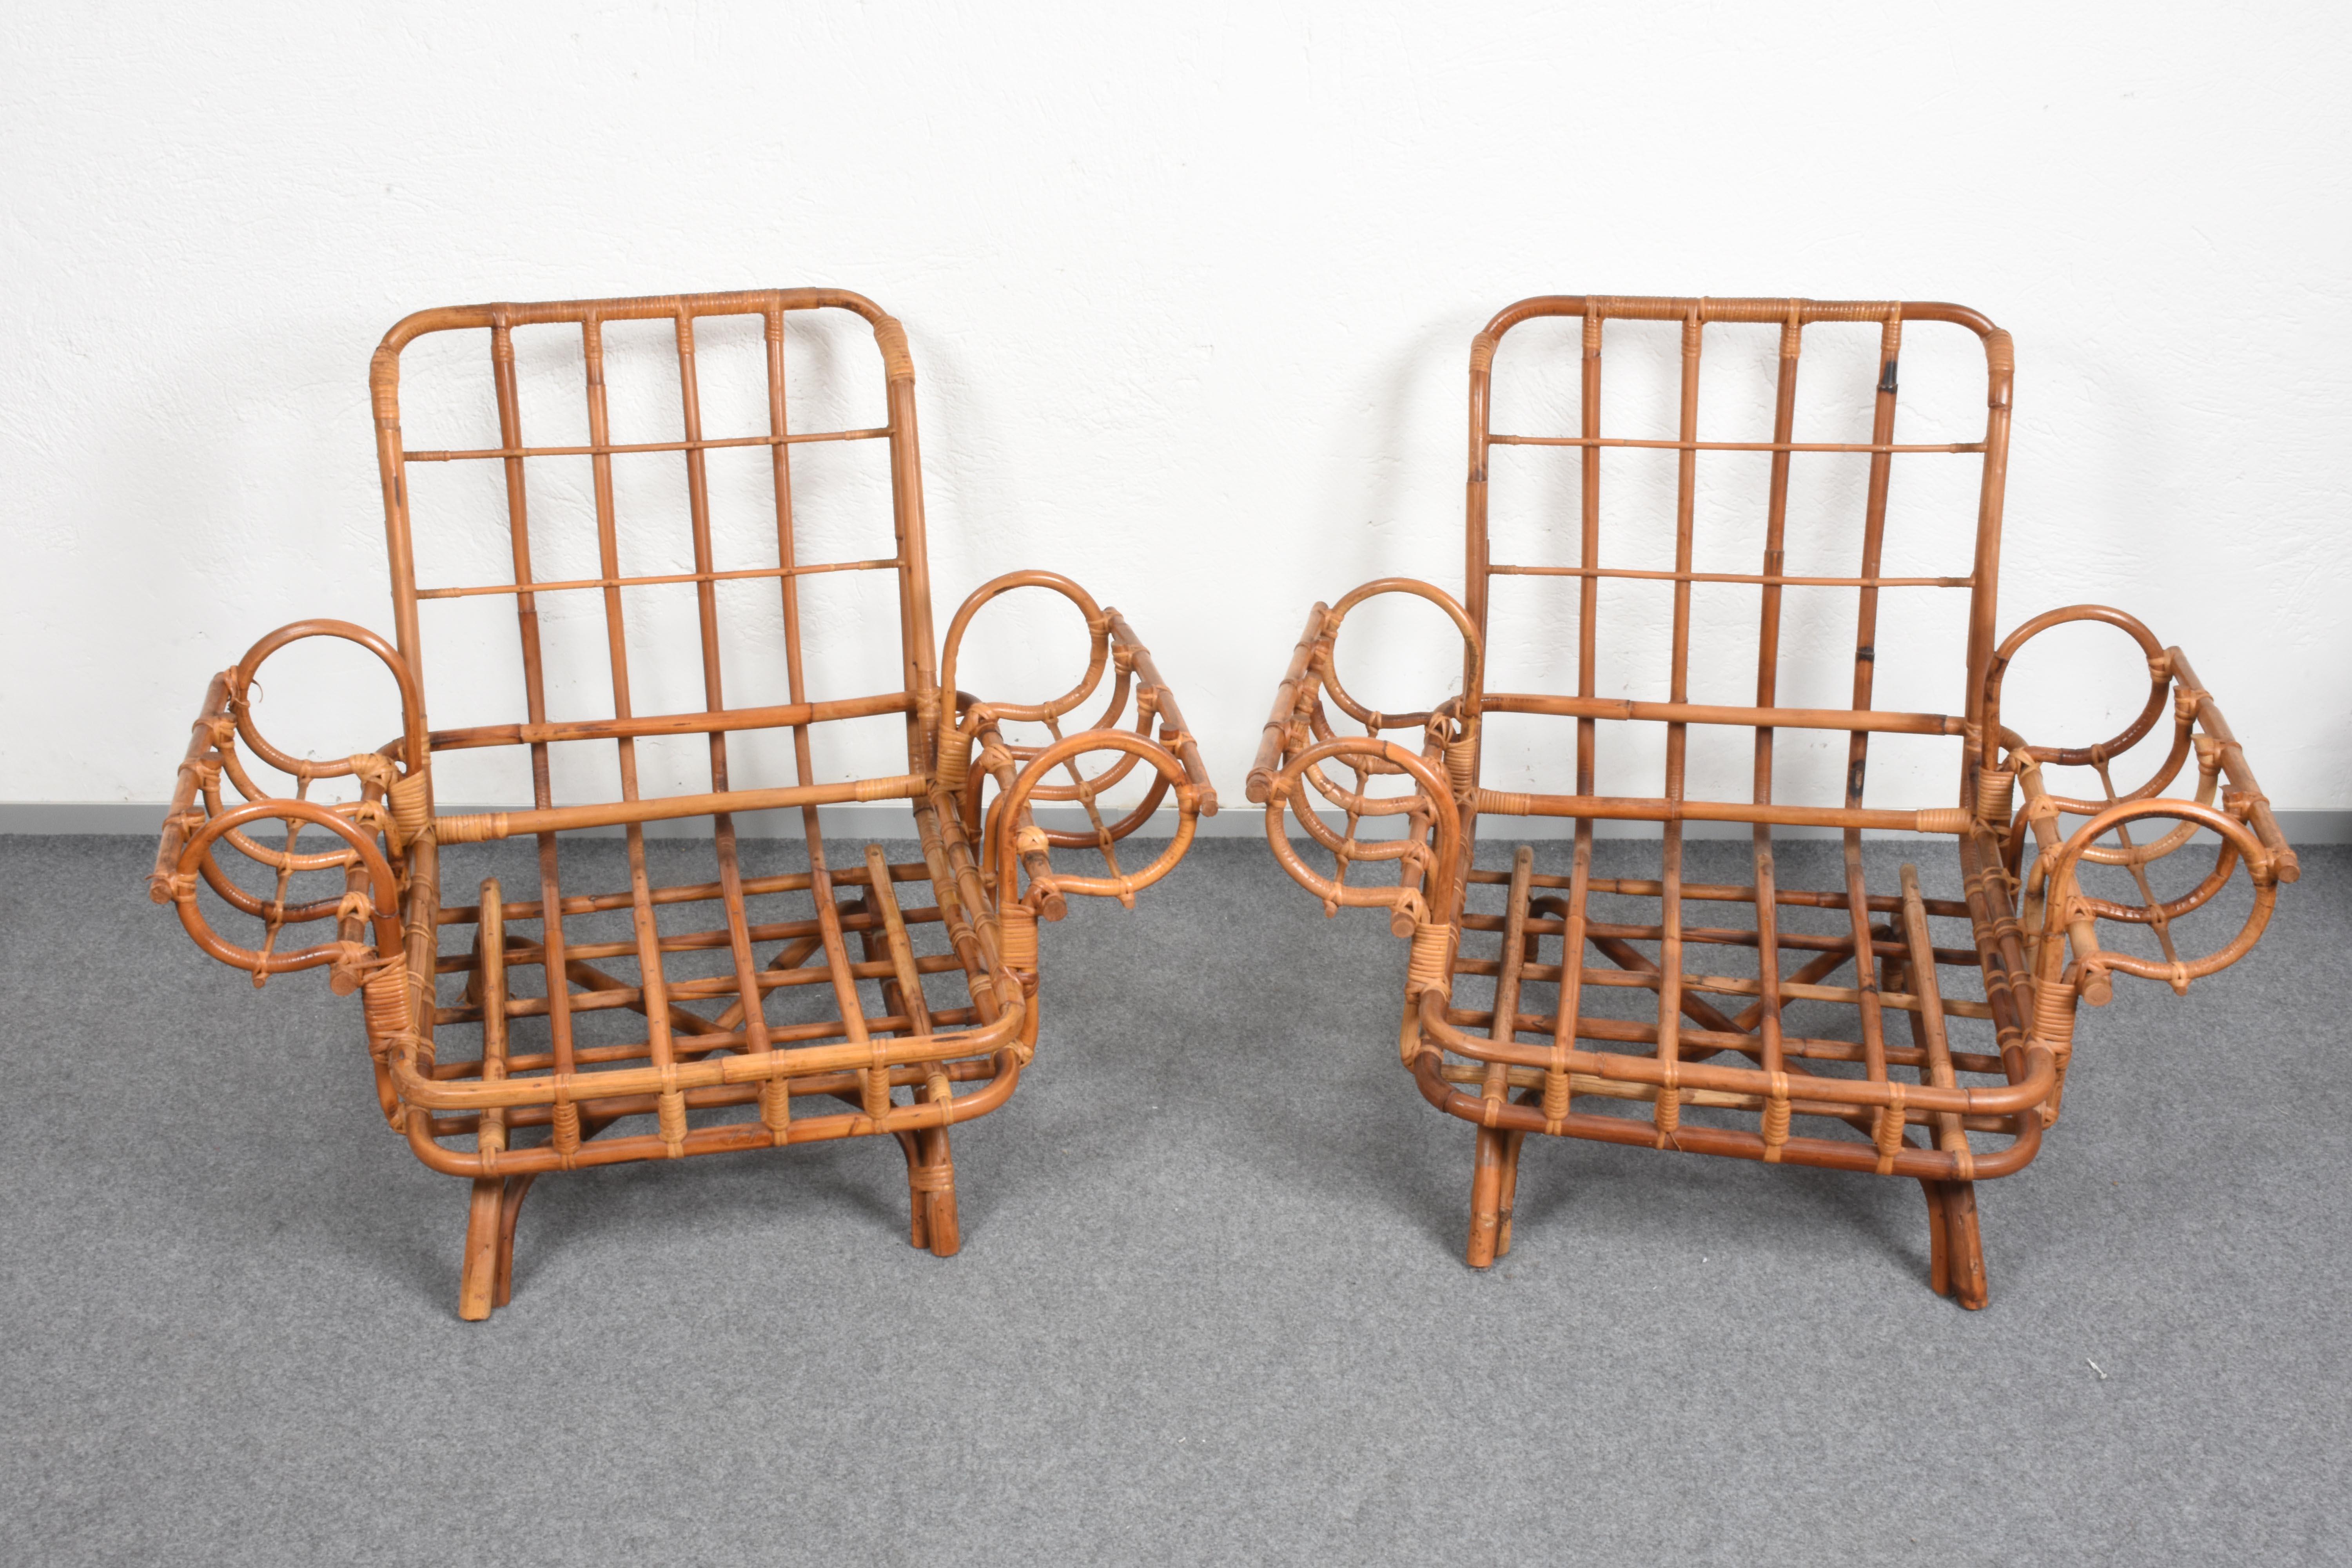 Pair of midcentury Italian armchairs in rattan and bamboo.

A great example of midcentury bamboo furniture constructed by hand with craftsmanship that is no longer the norm.

A perfect match for a garden project and for feeling the breeze of Italian